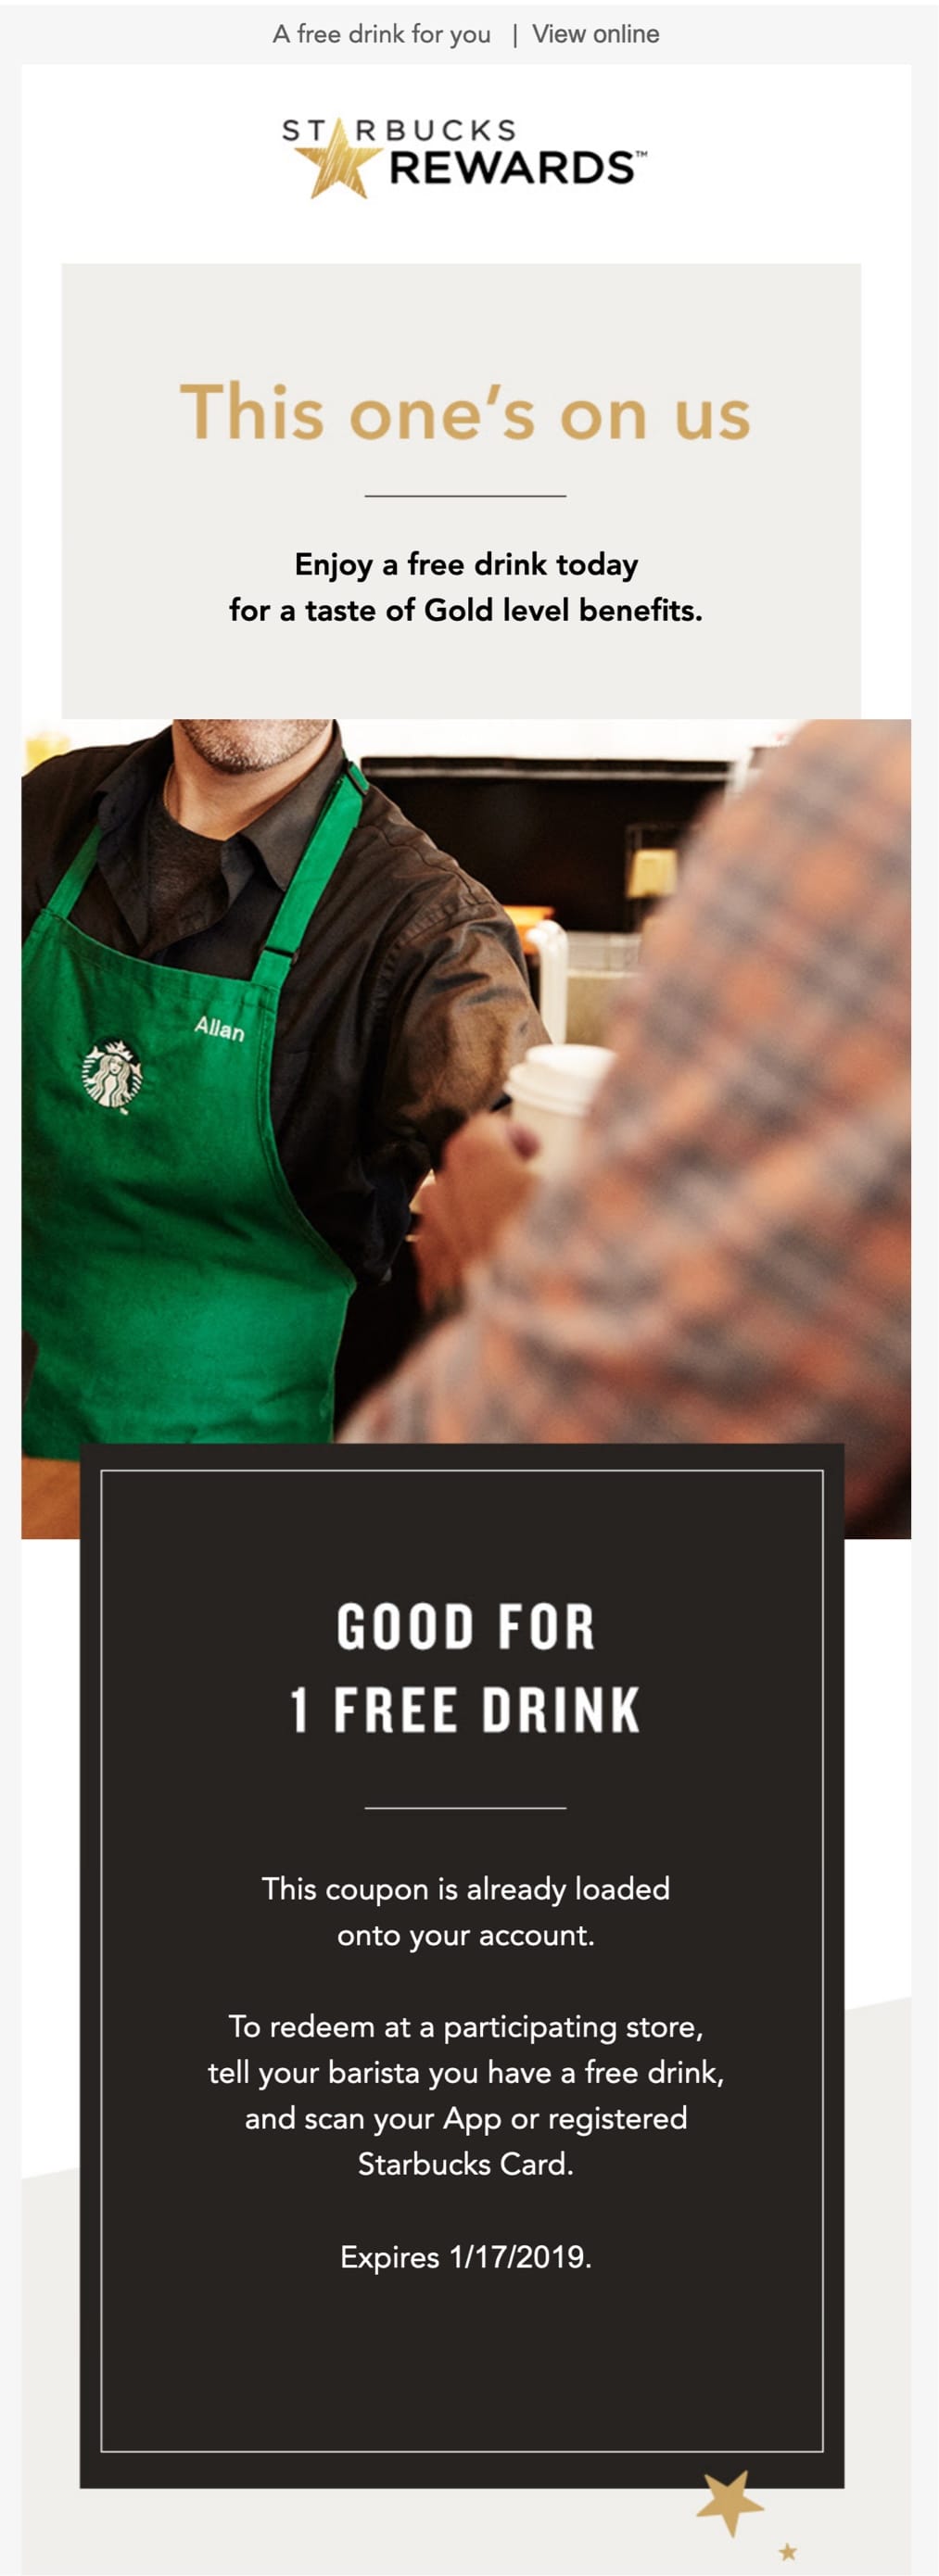 email-marketing-best-practices-starbucks-free-coffee